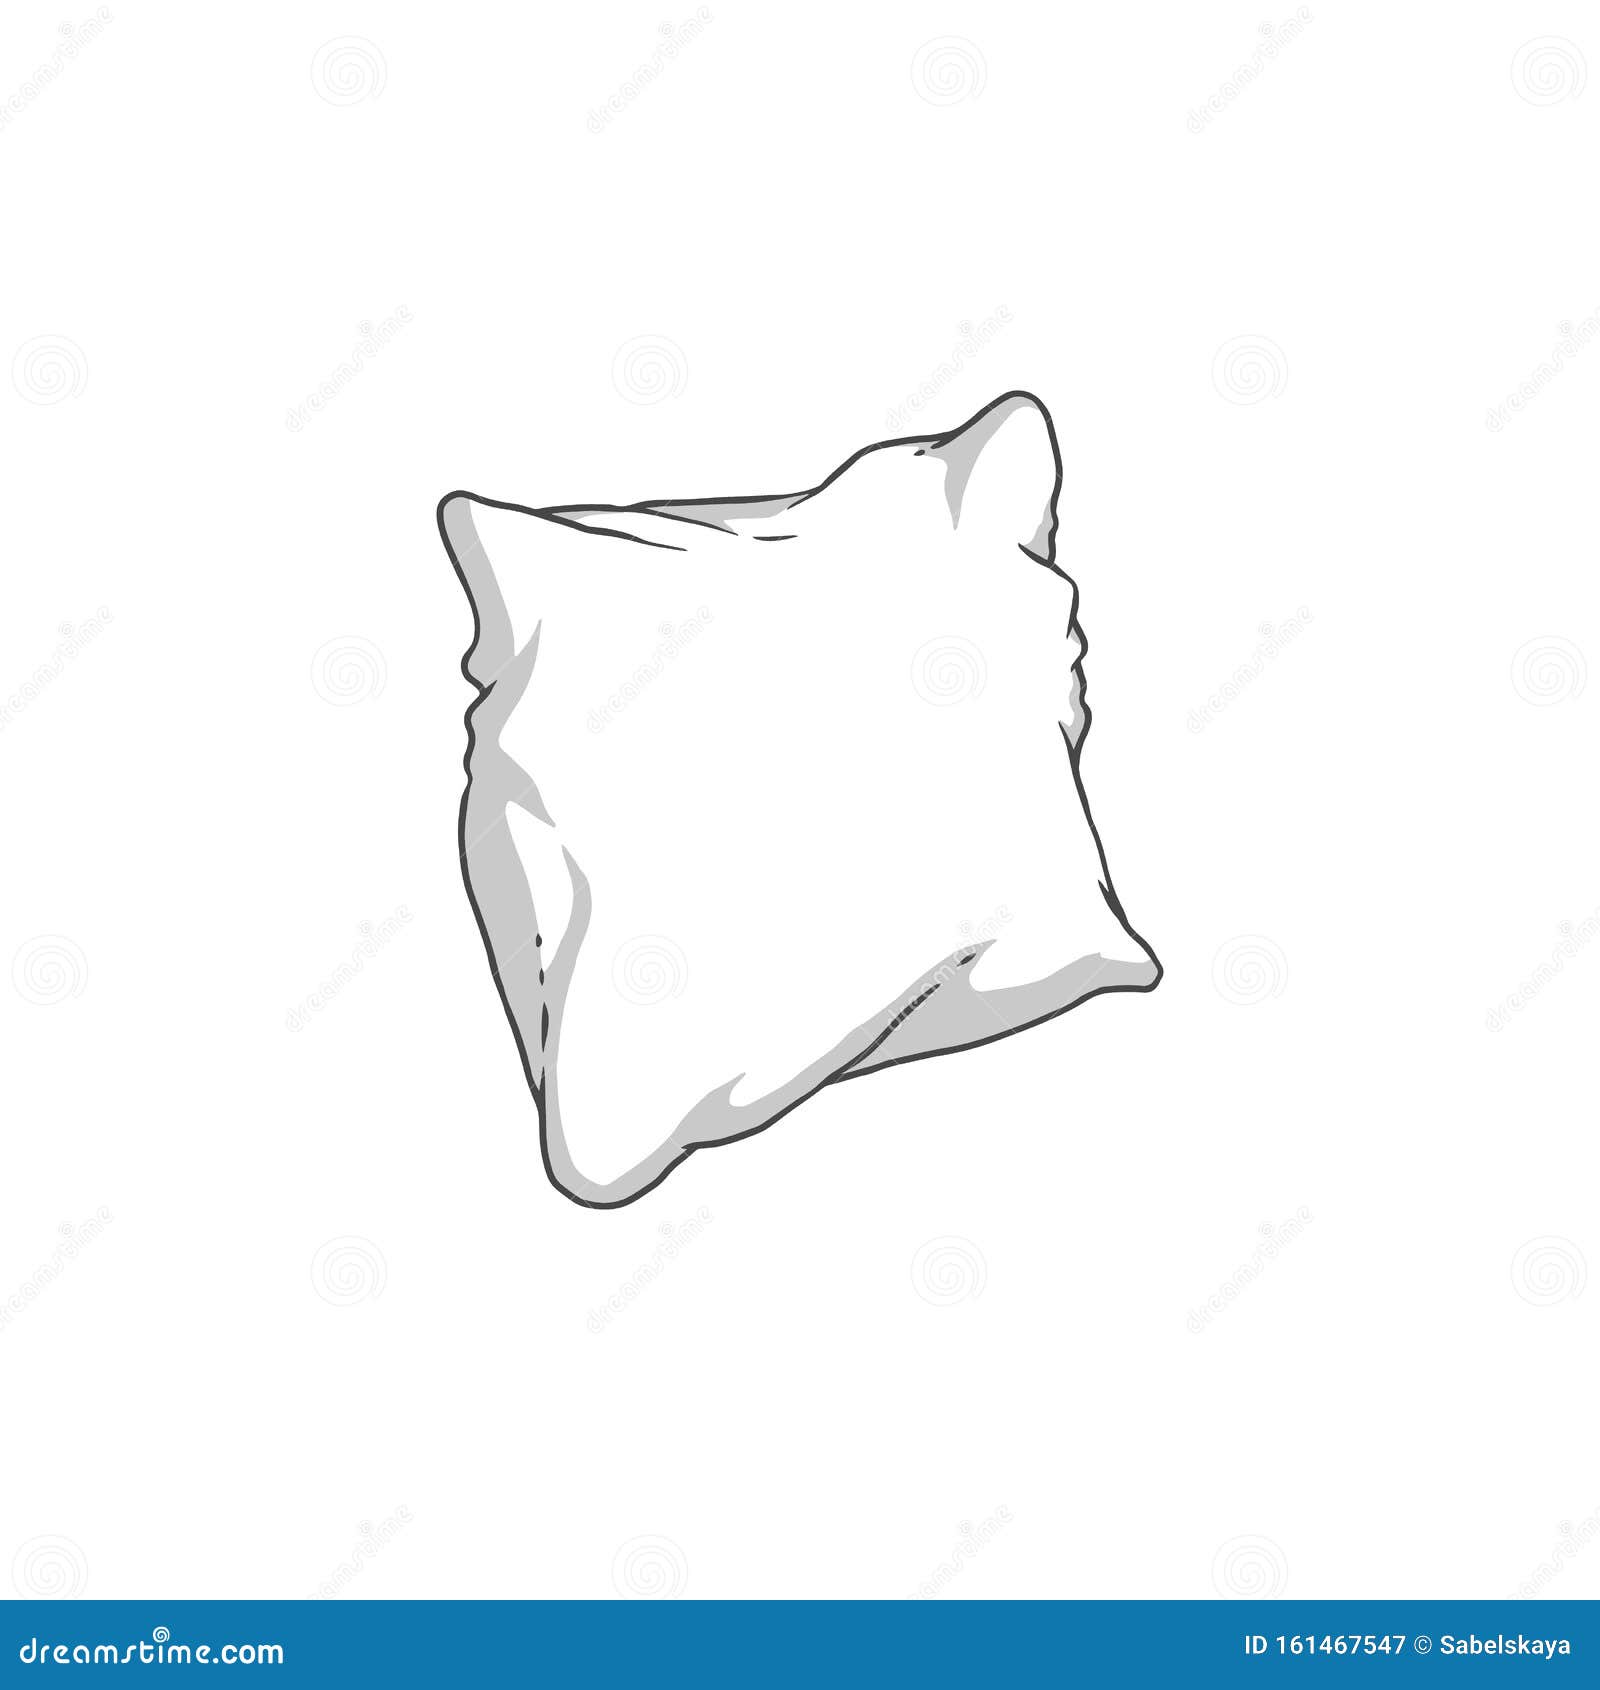 Blank white square pillow Royalty Free Vector Image